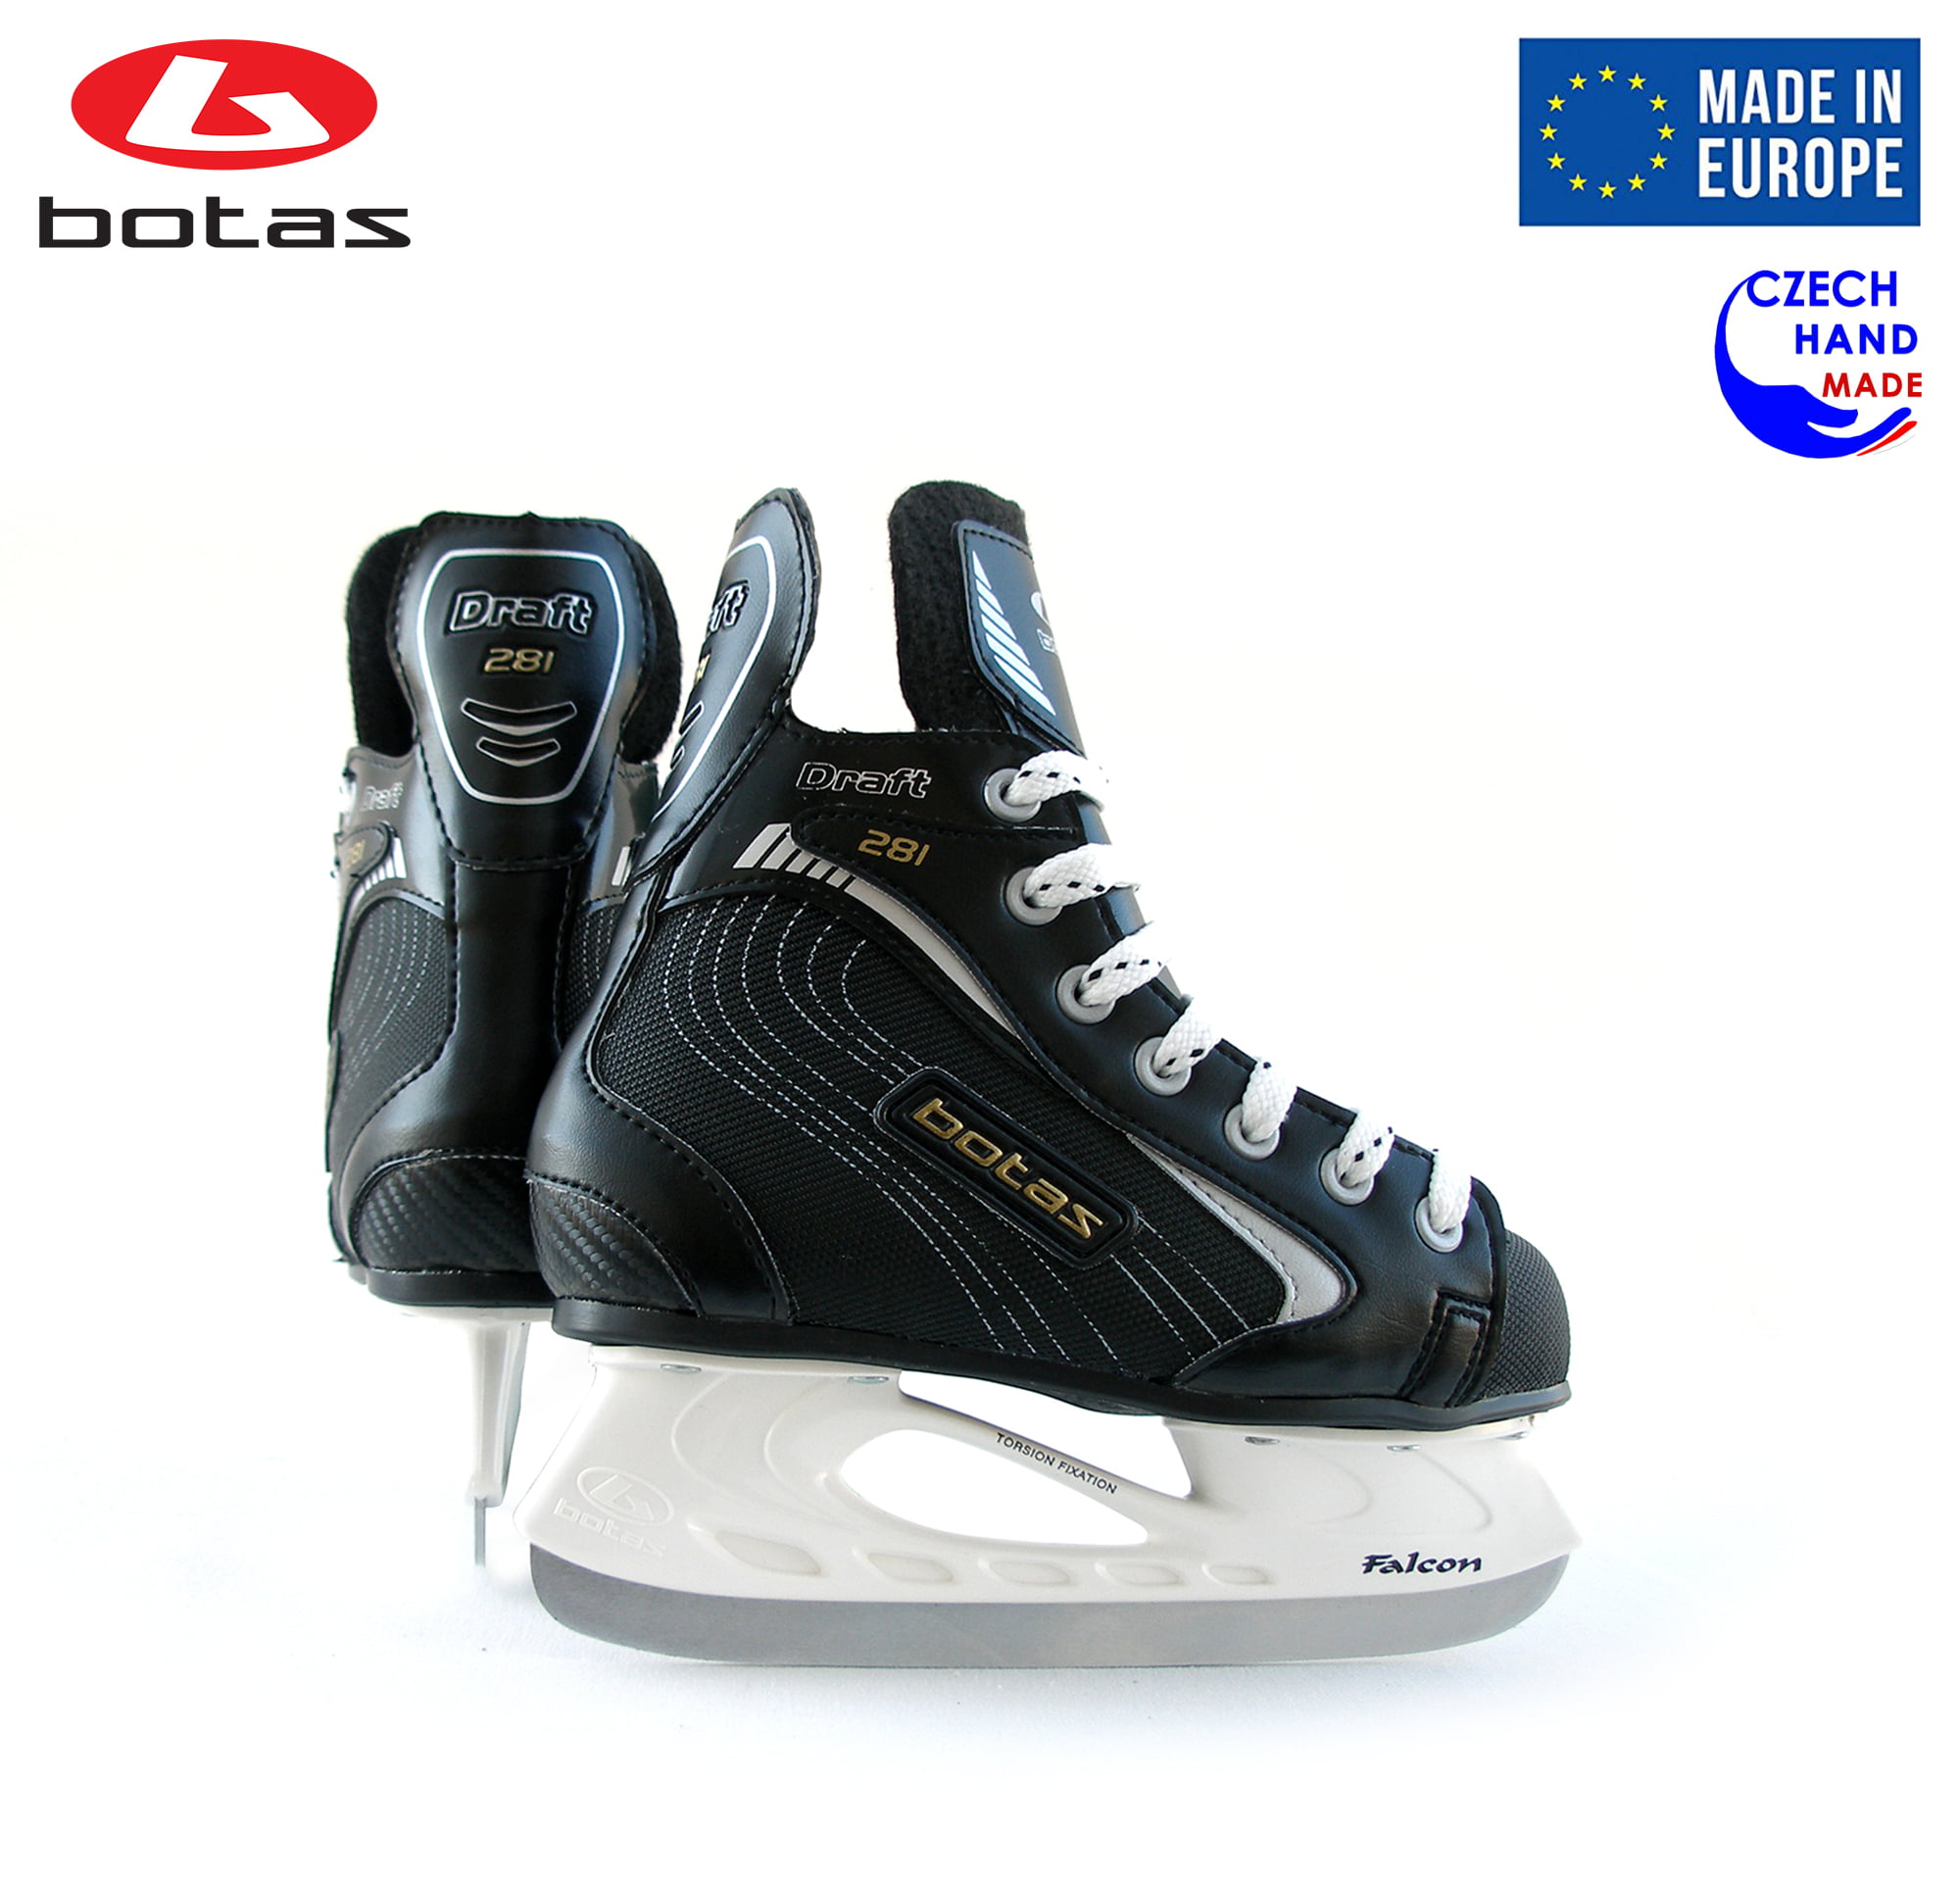 BOTAS - DRAFT 281 - Men's Ice Hockey Skates | Made in Europe (Czech  Republic) | Color: Black, Size Adult 7.5